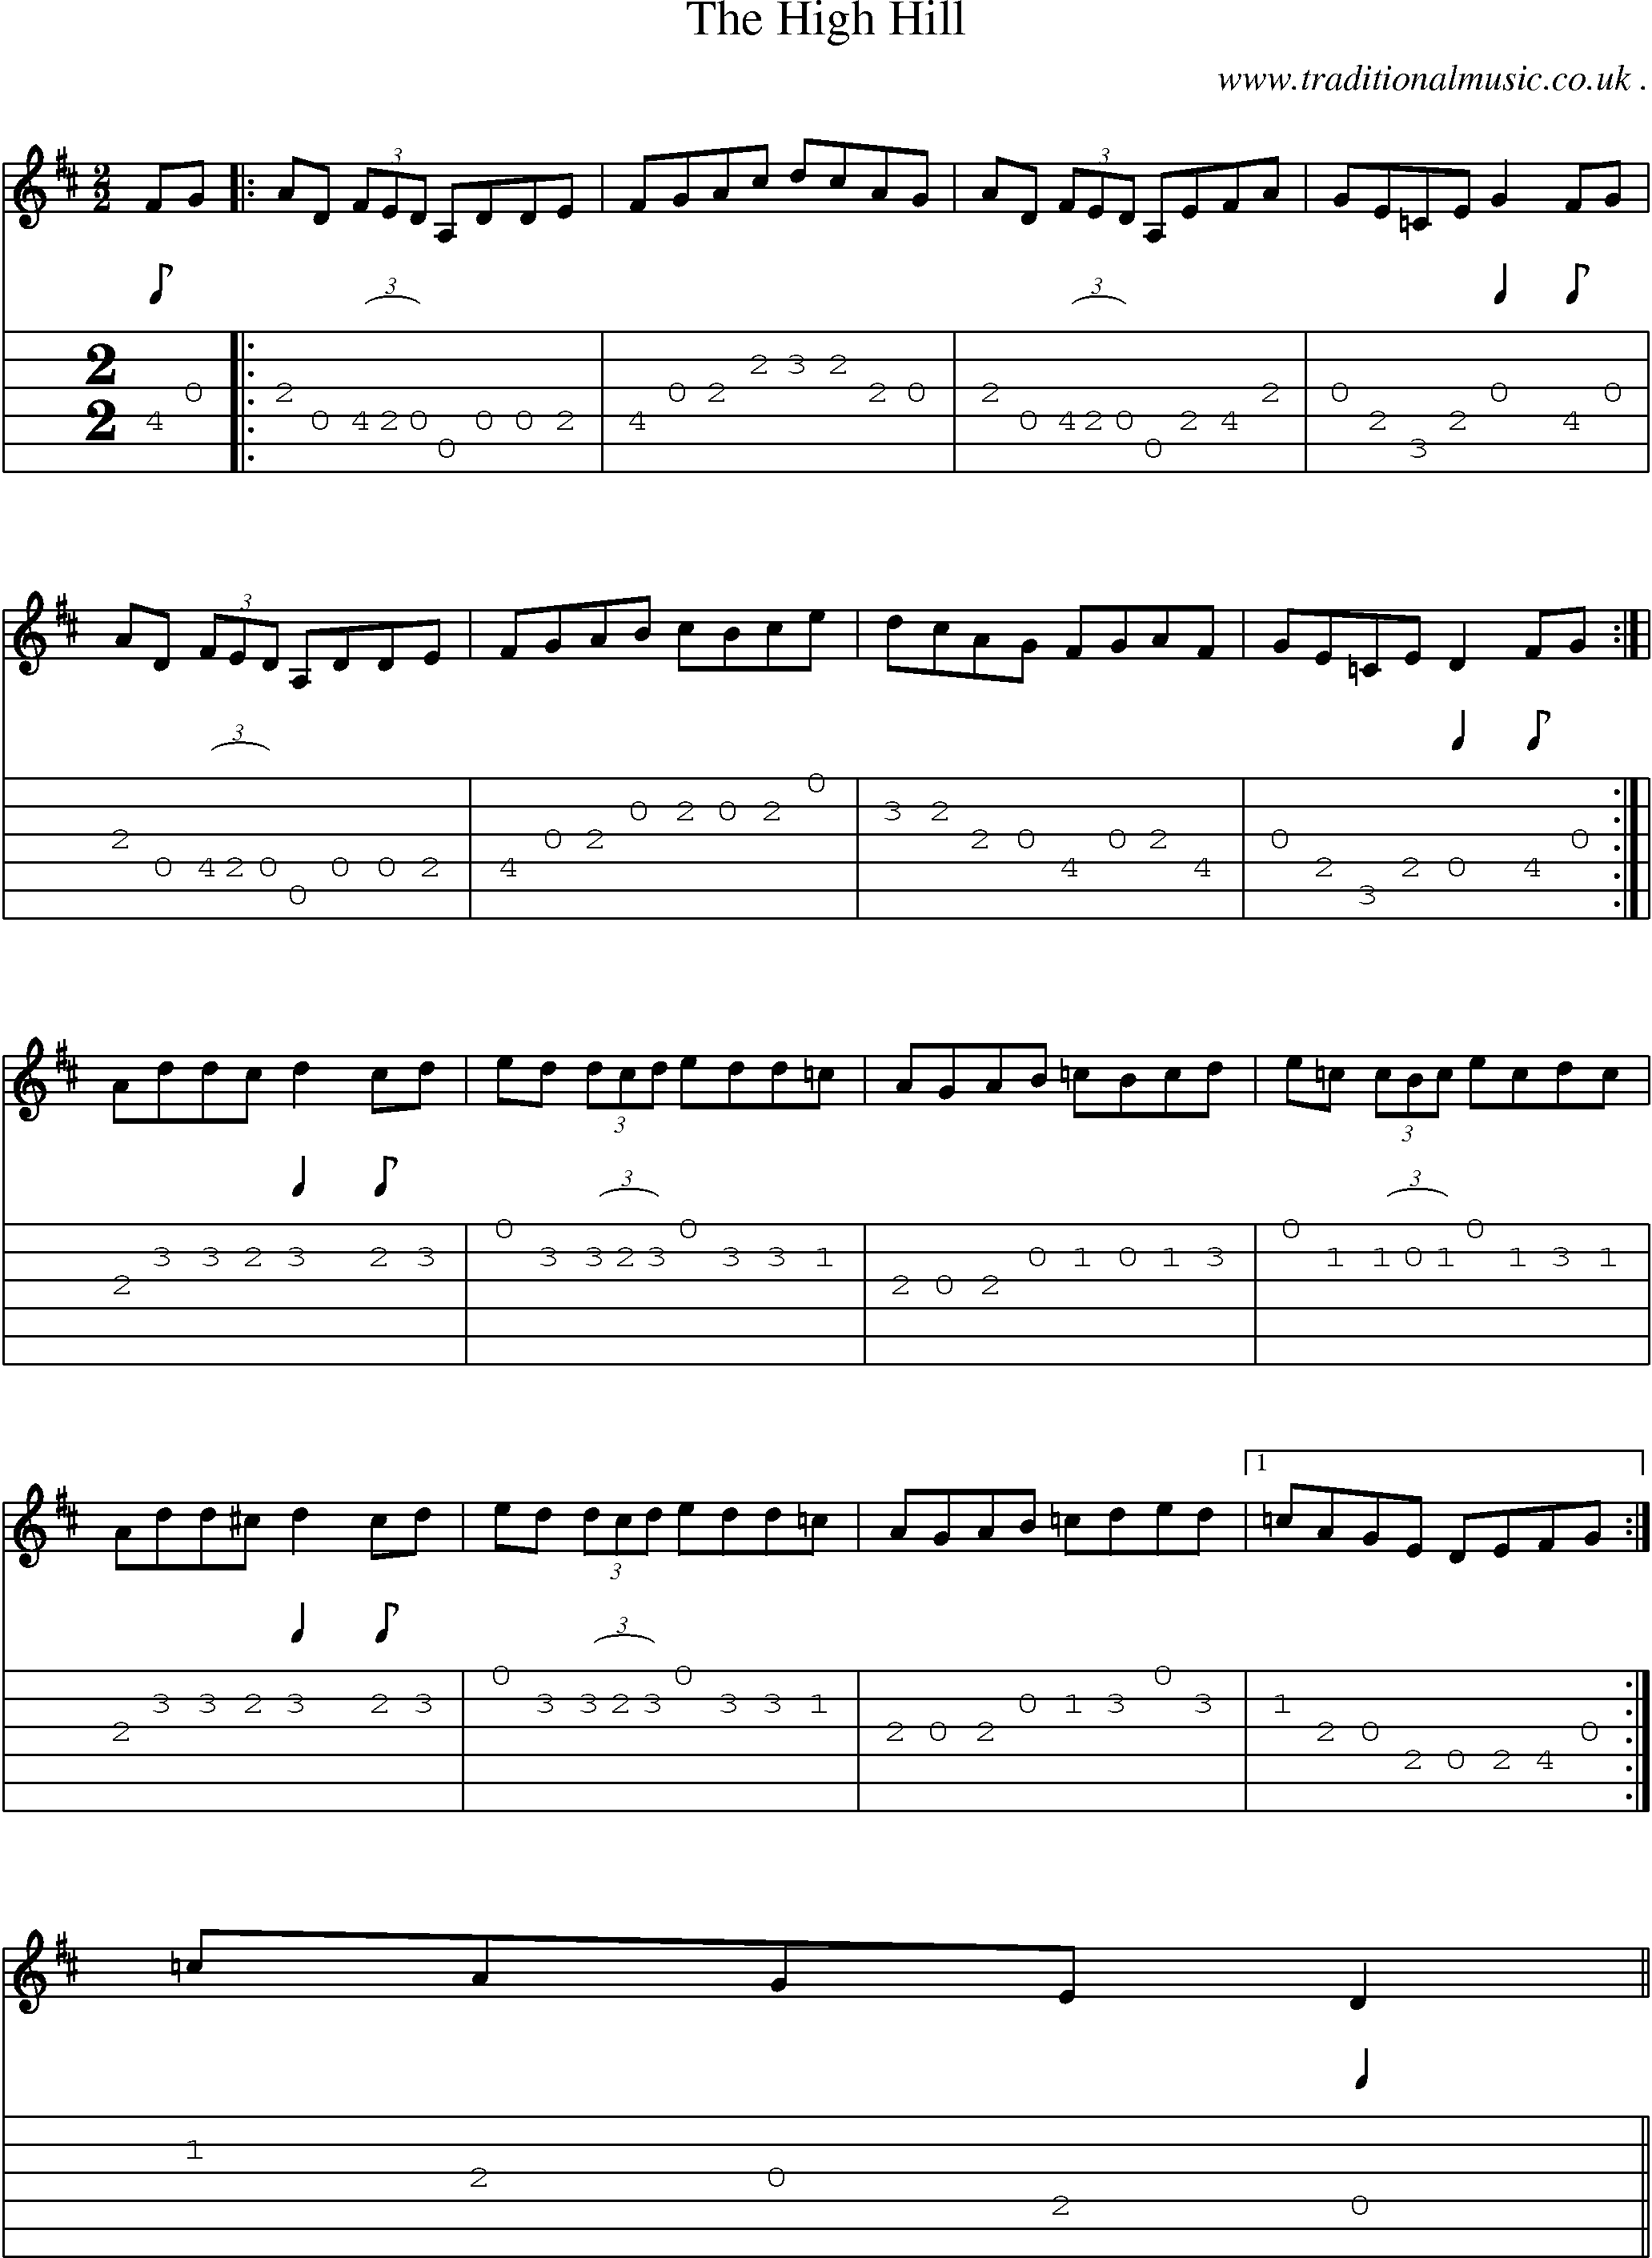 Sheet-Music and Guitar Tabs for The High Hill